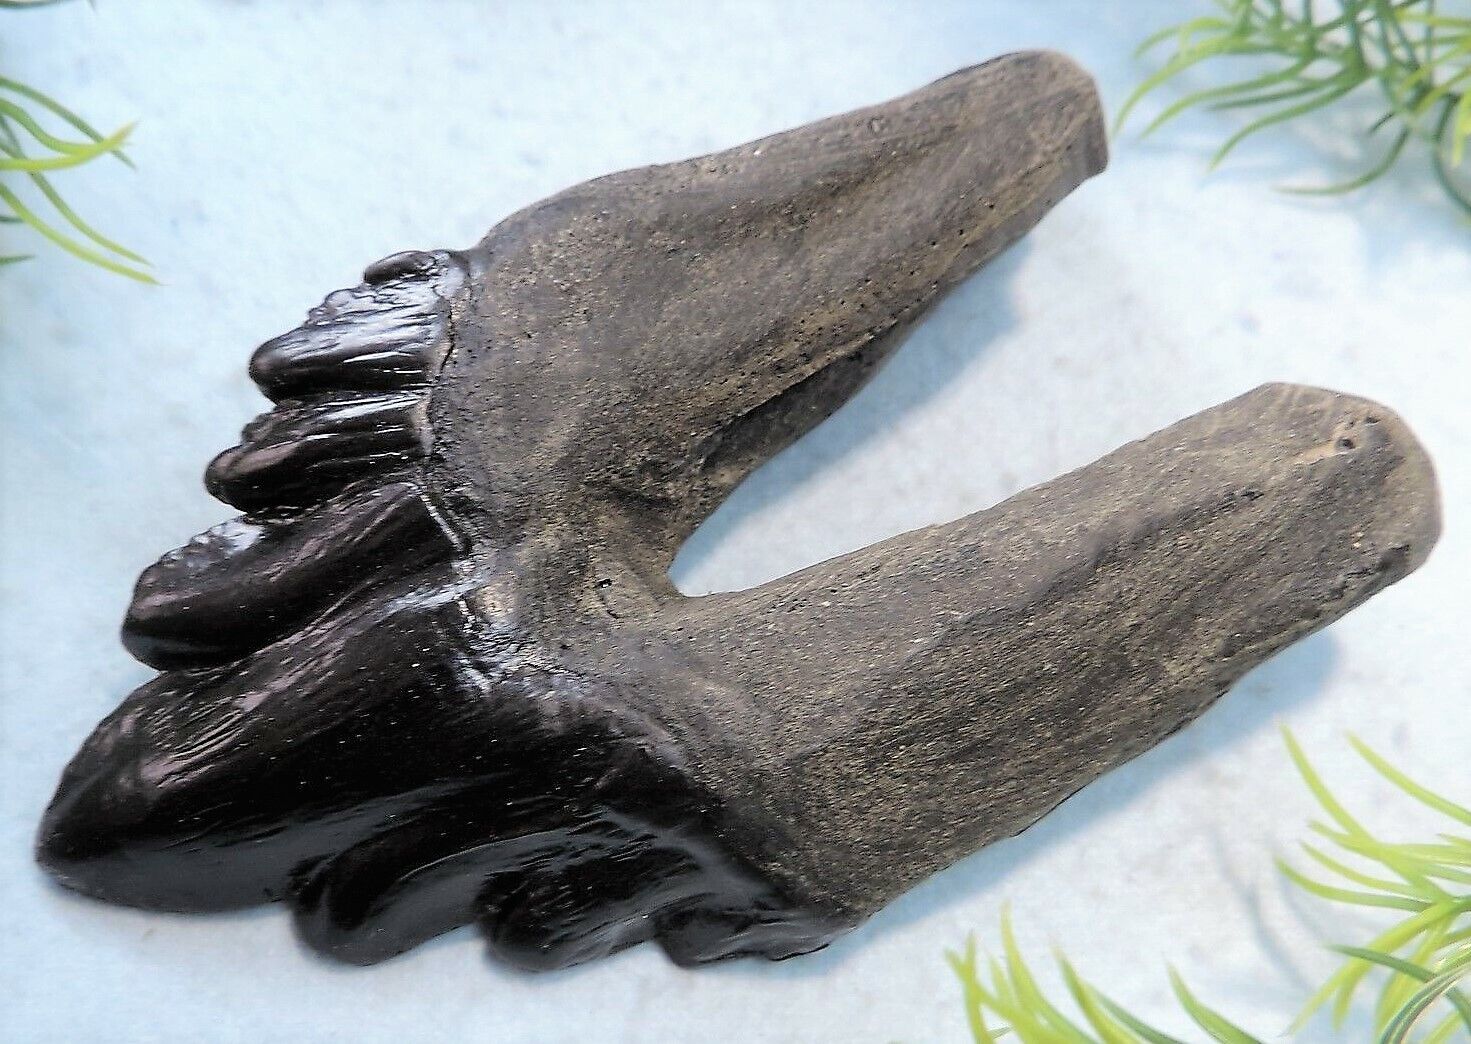 4 INCH LONG ARCHAEOCETE RESIN REPLICA EXTINCT WHALE TOOTH FOSSIL RELIC TEETH NEW